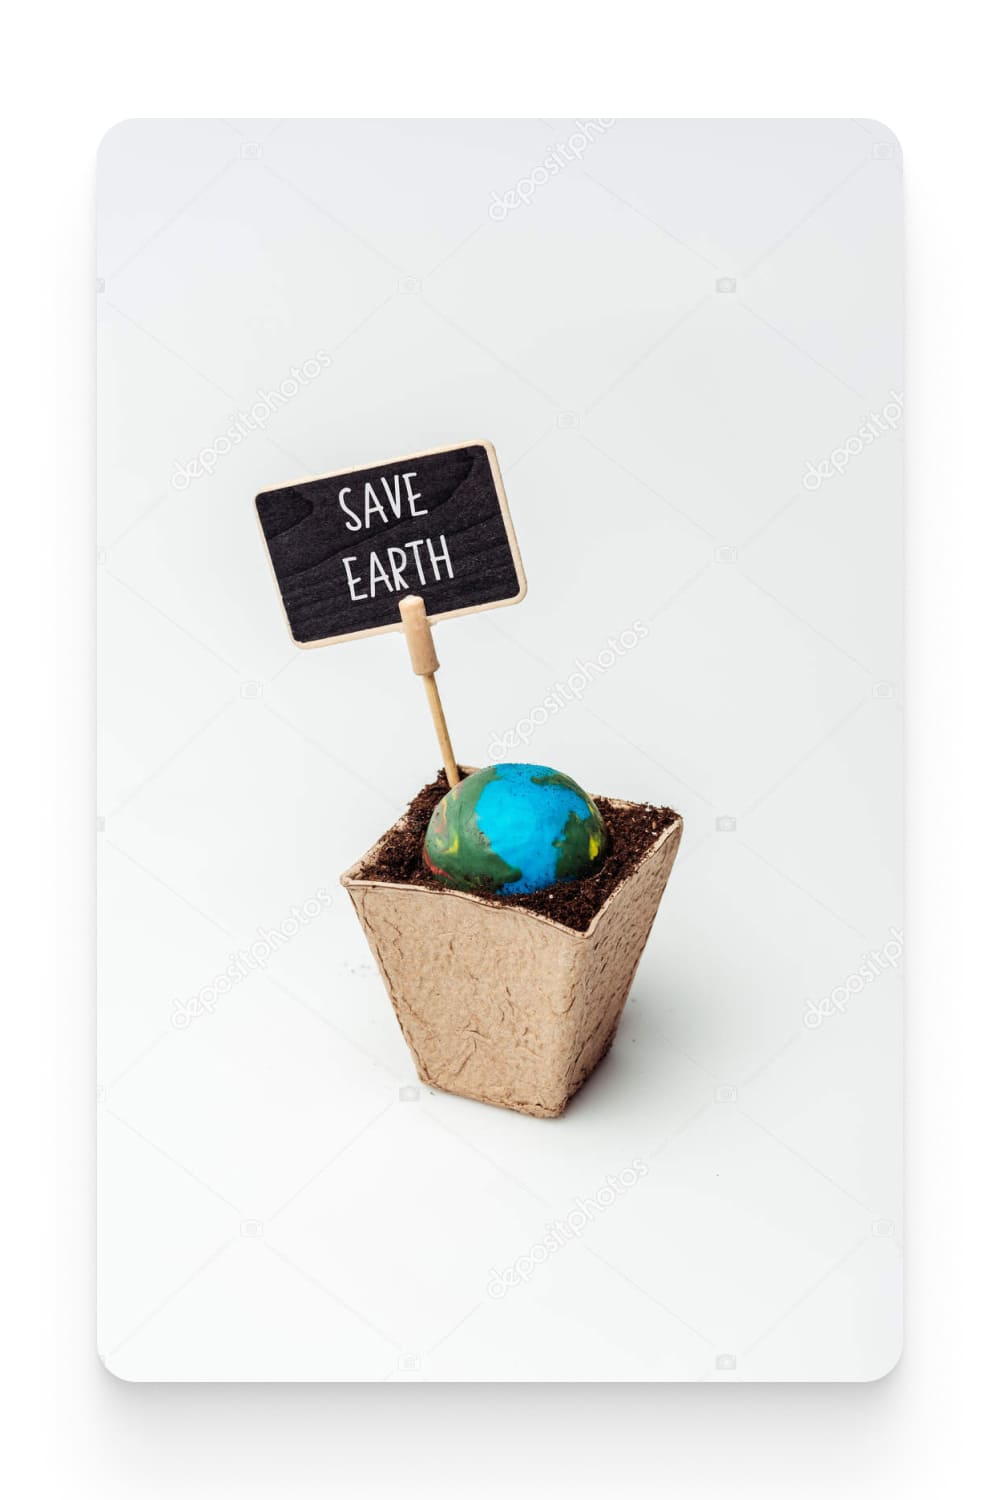 Earth model and sign save earth in flower pot isolated on white.